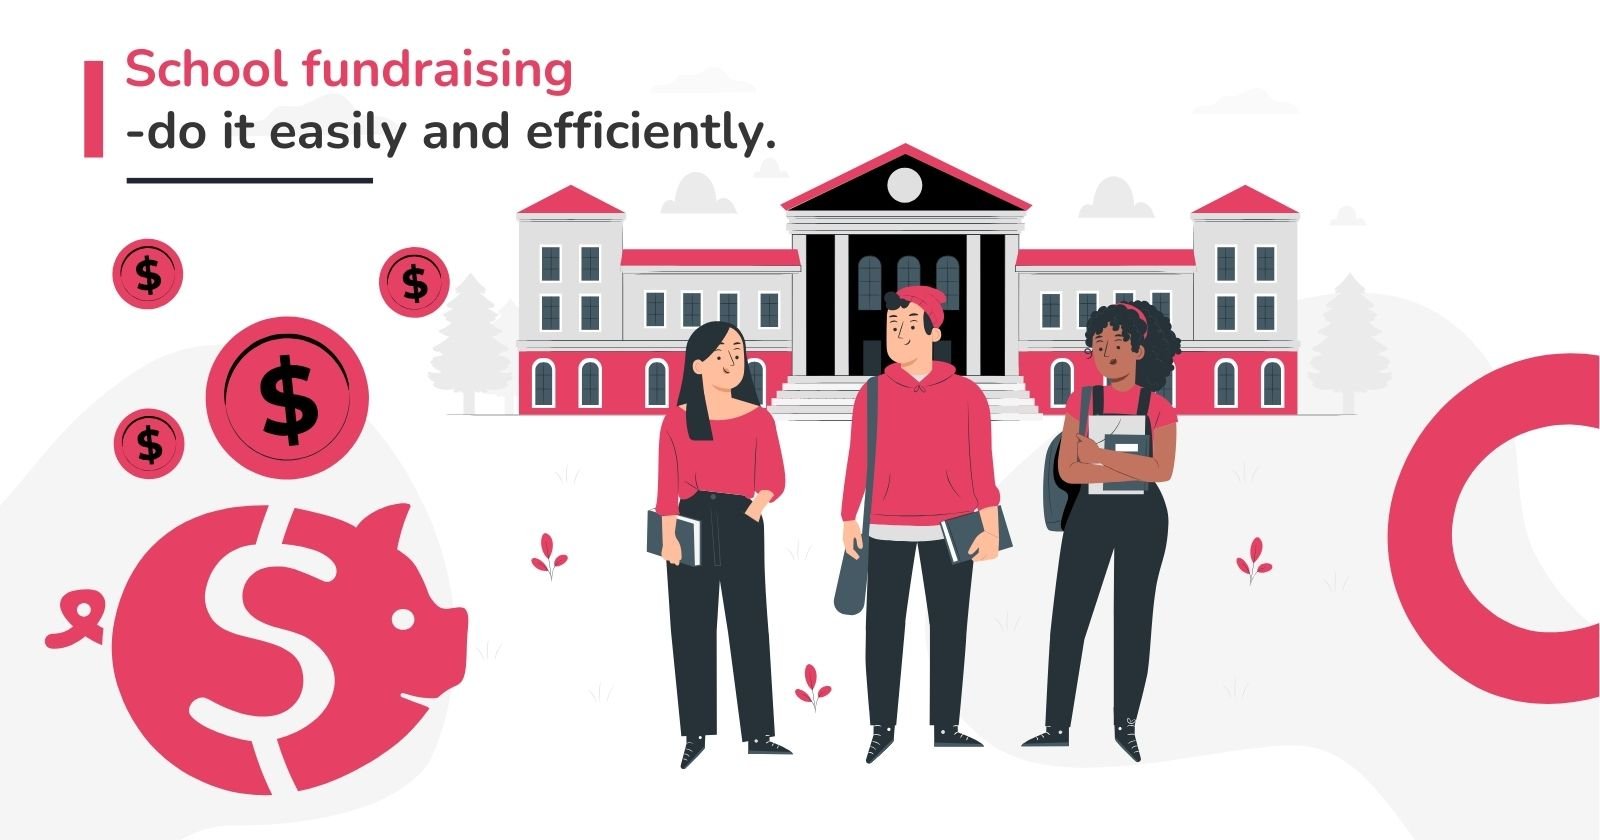 School fundraising - do it easily and efficiently.